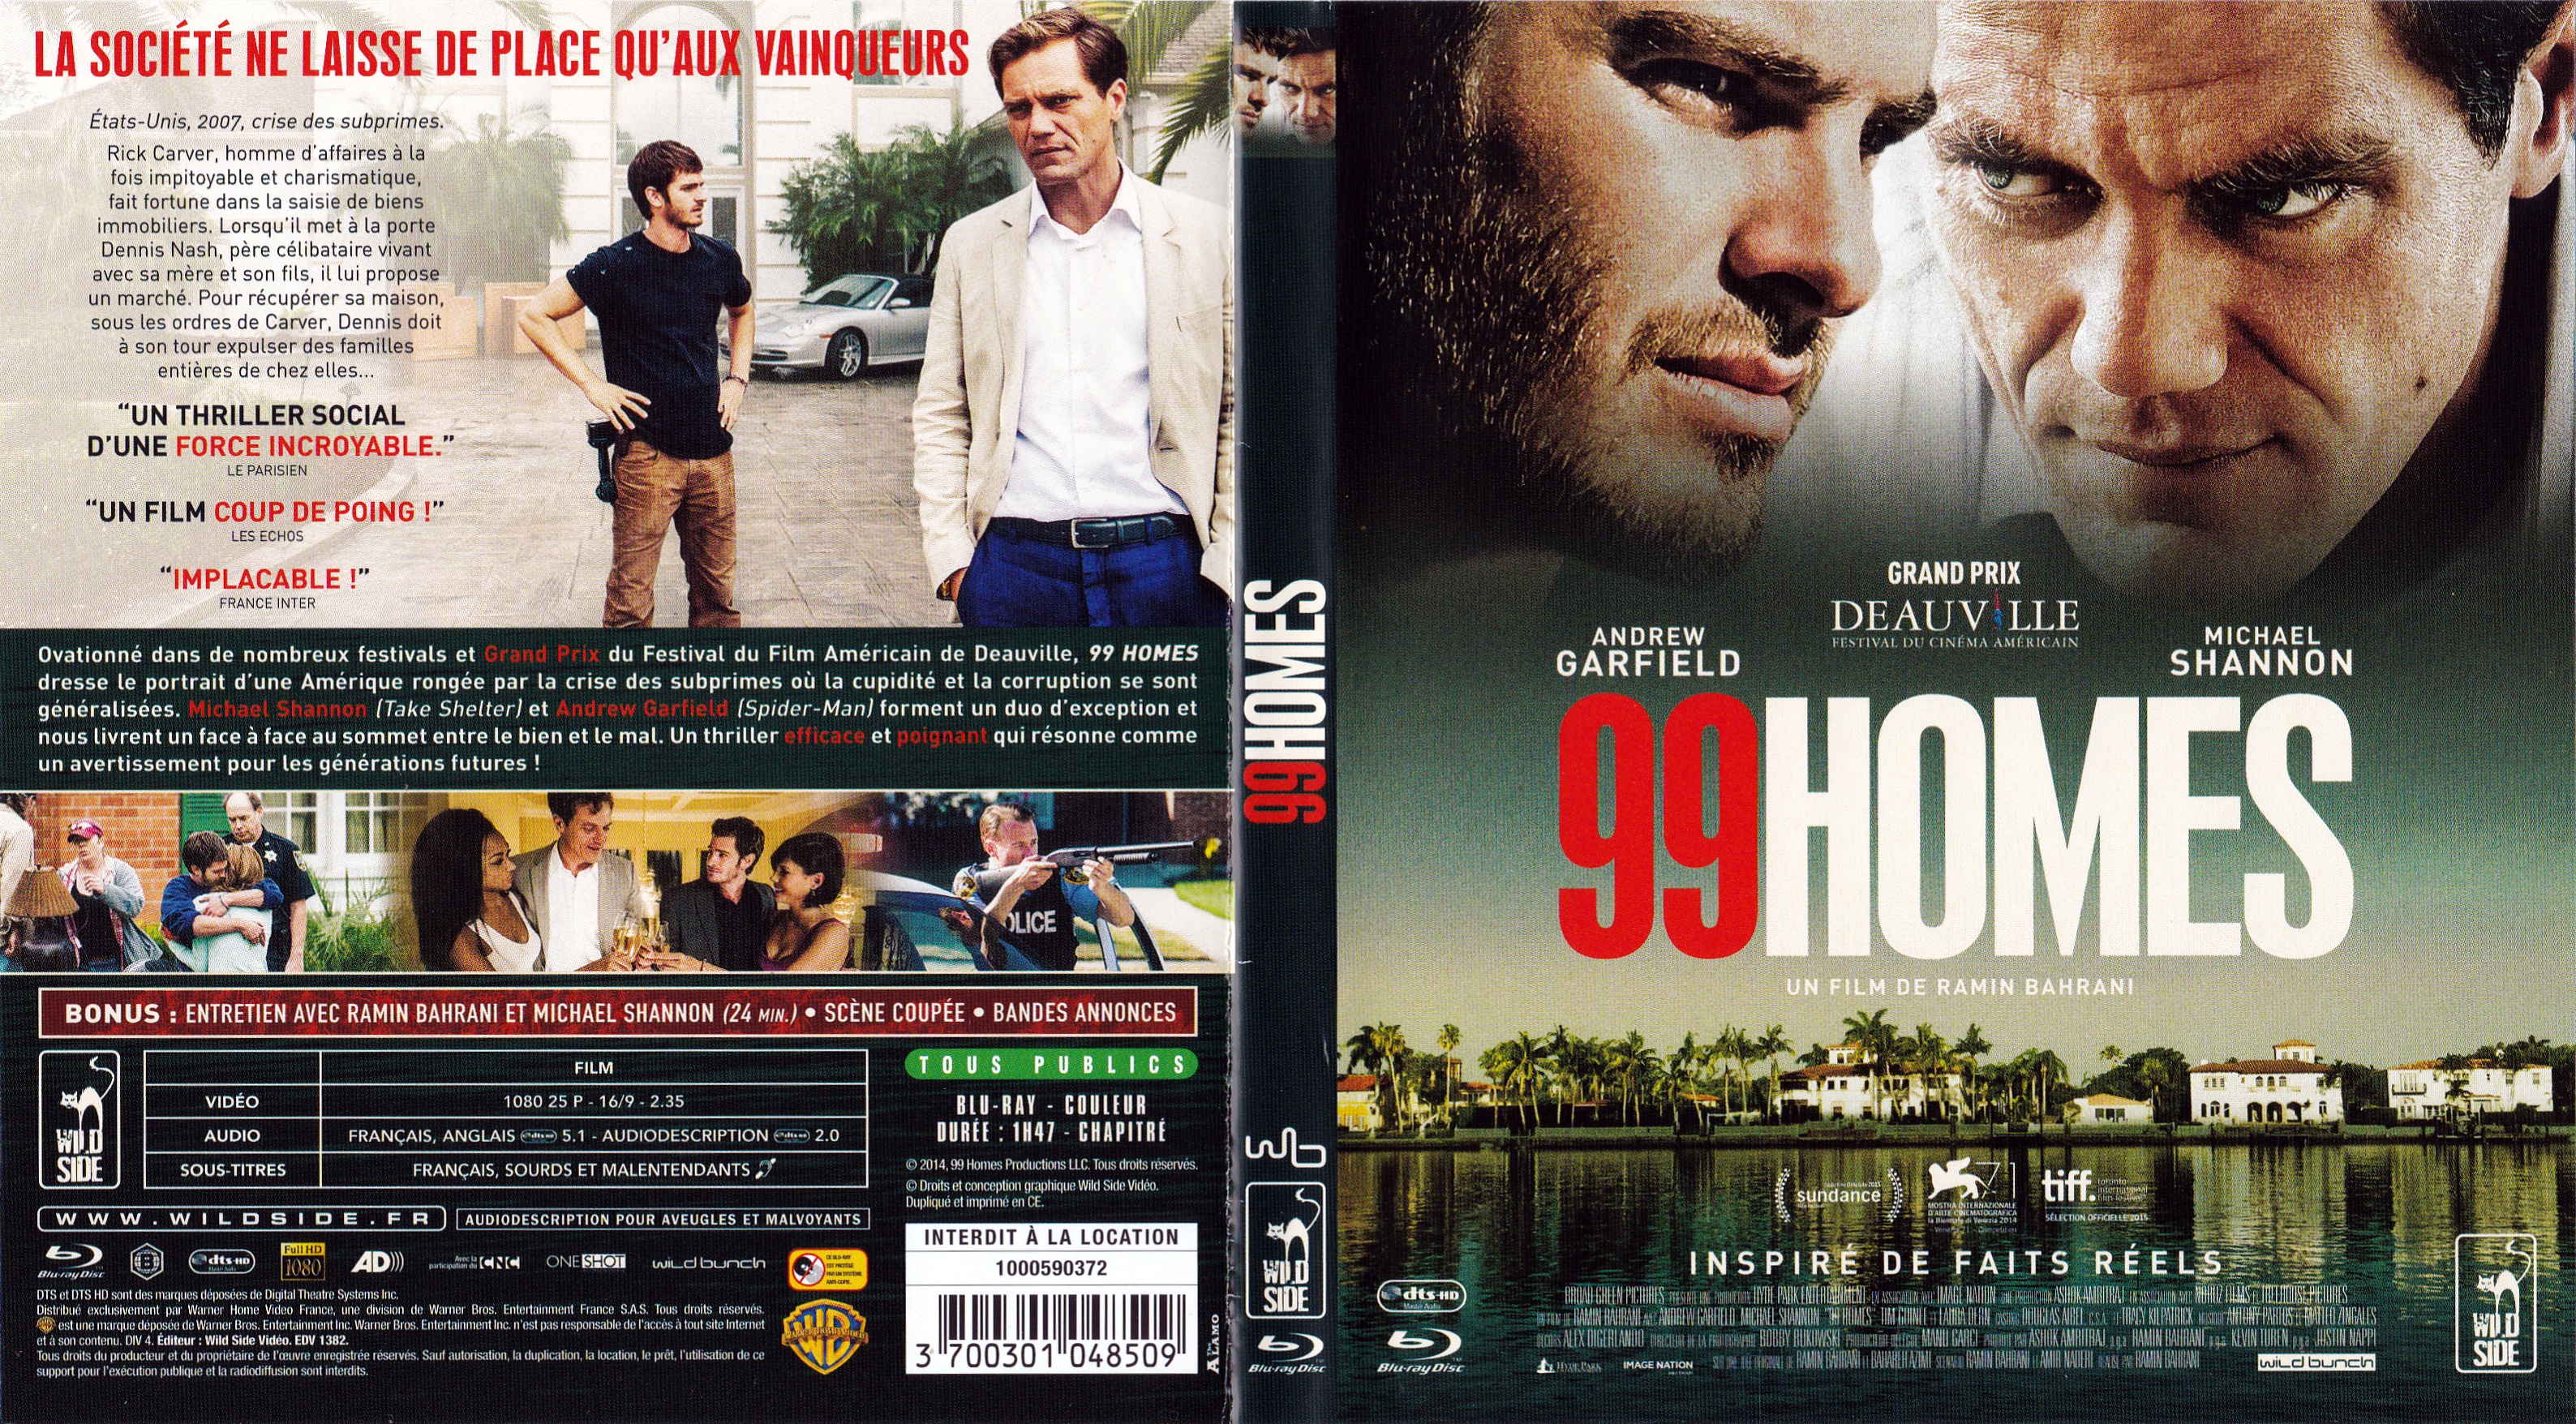 Jaquette DVD 99 homes (BLU-RAY)